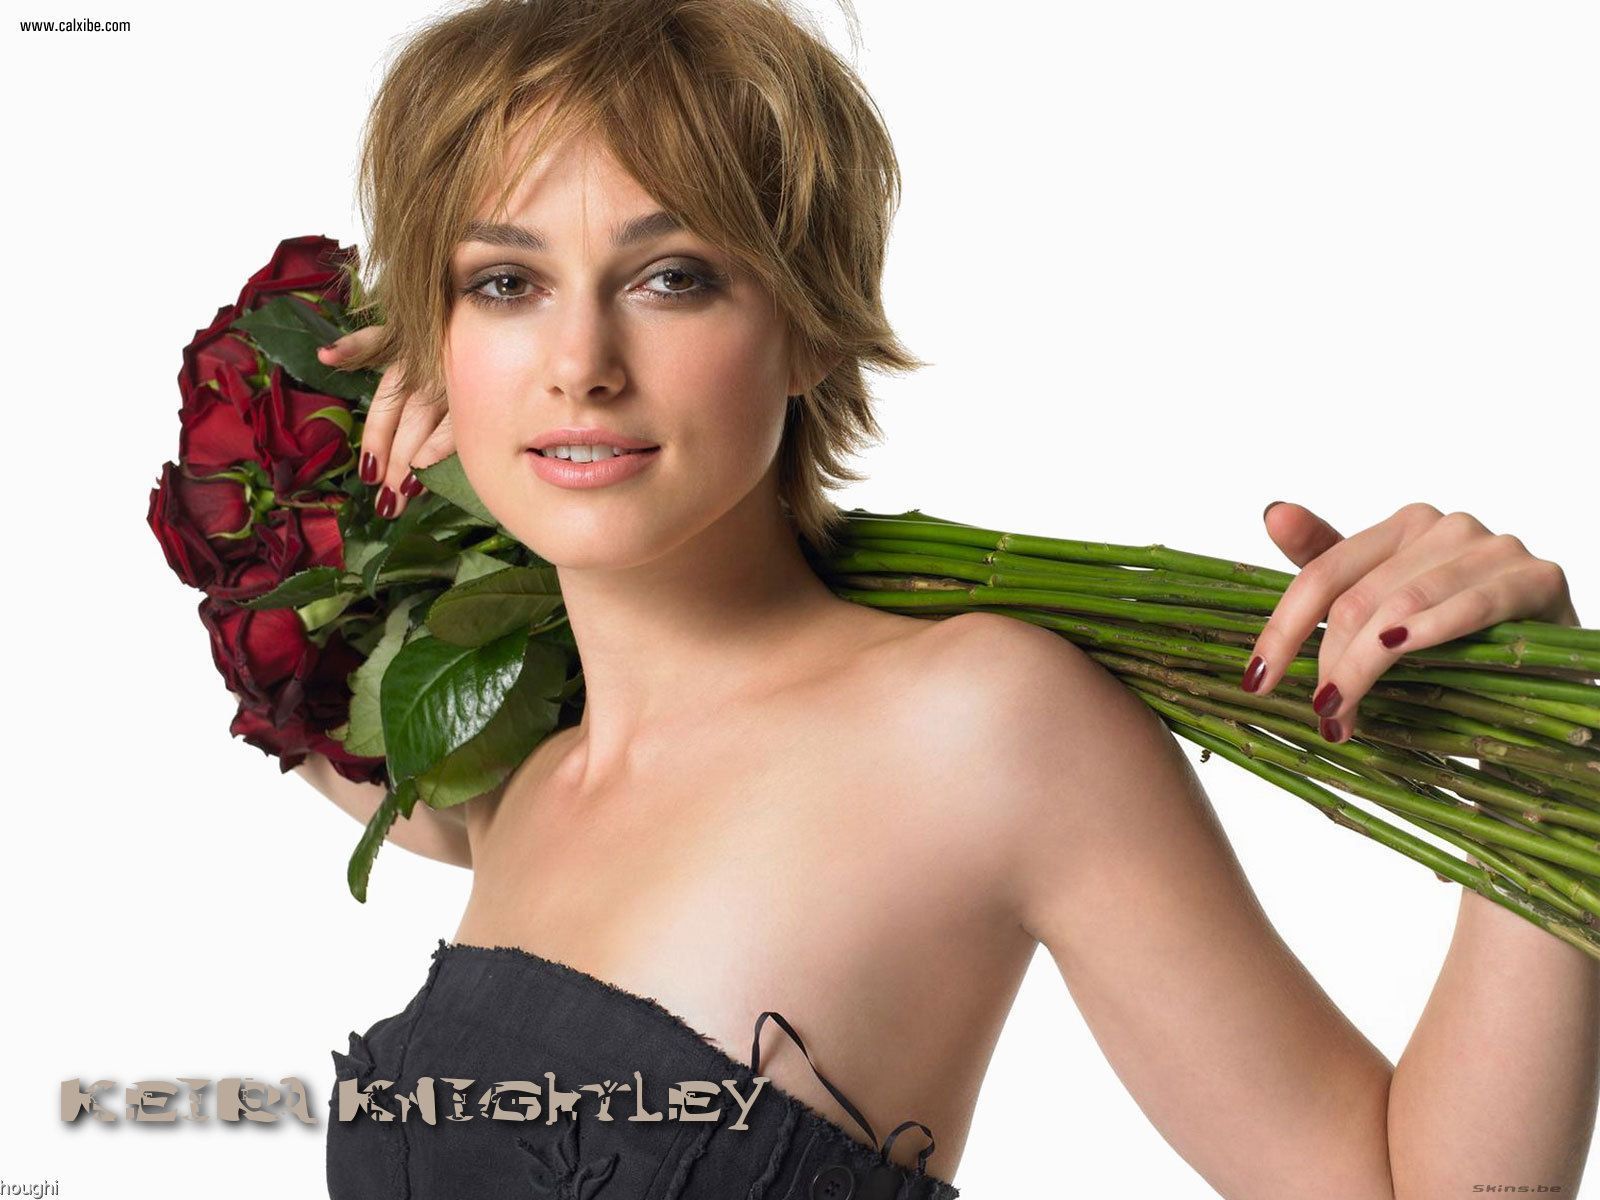 ... knightley born 26 march 1985 is an english actress and model keira